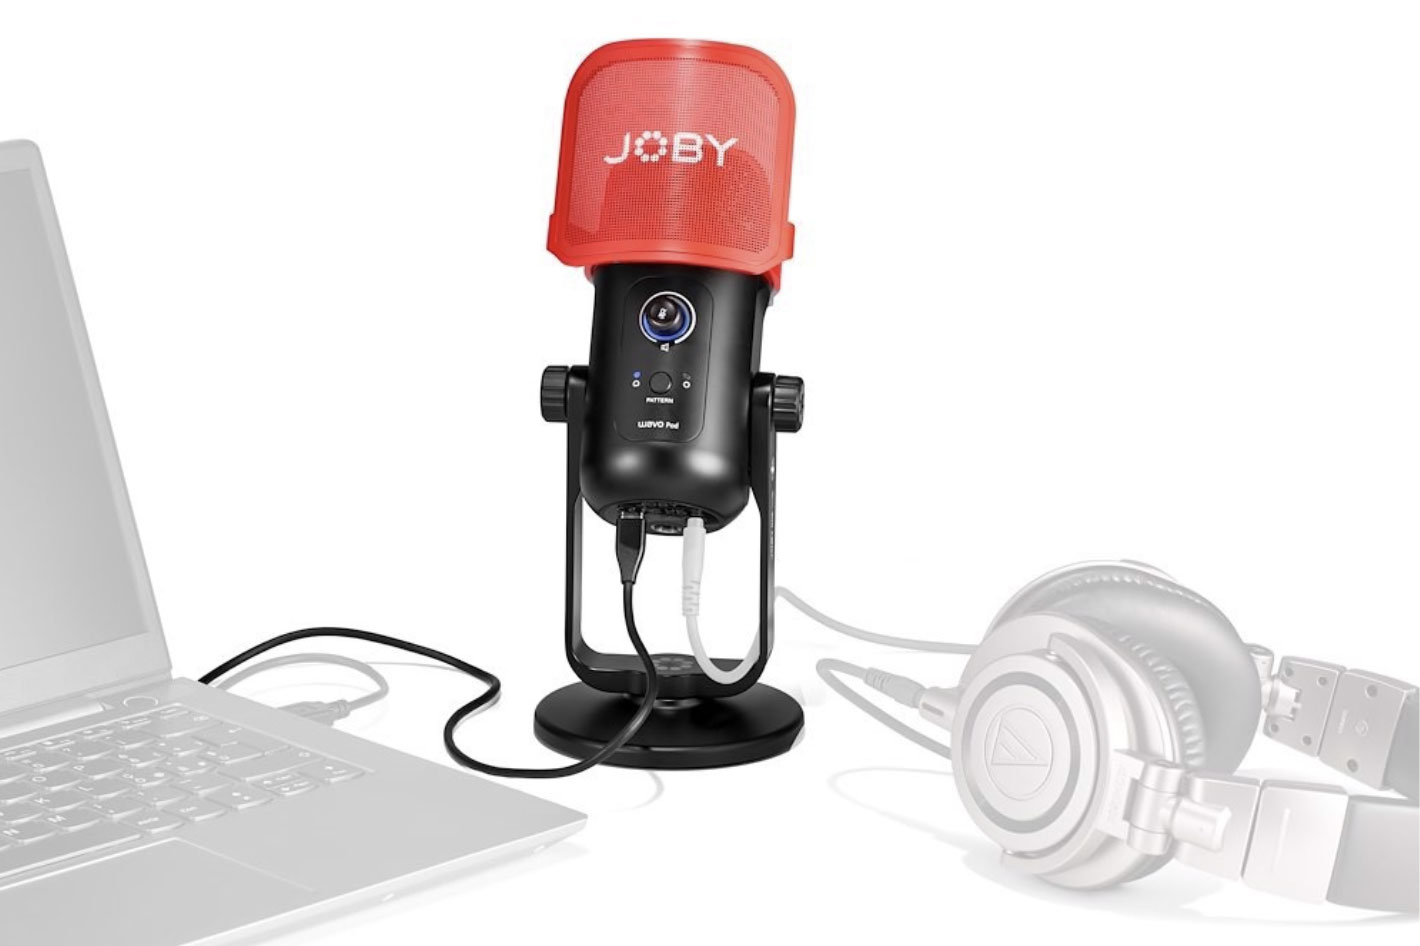 JOBY introduces its new lineup of WAVO microphones